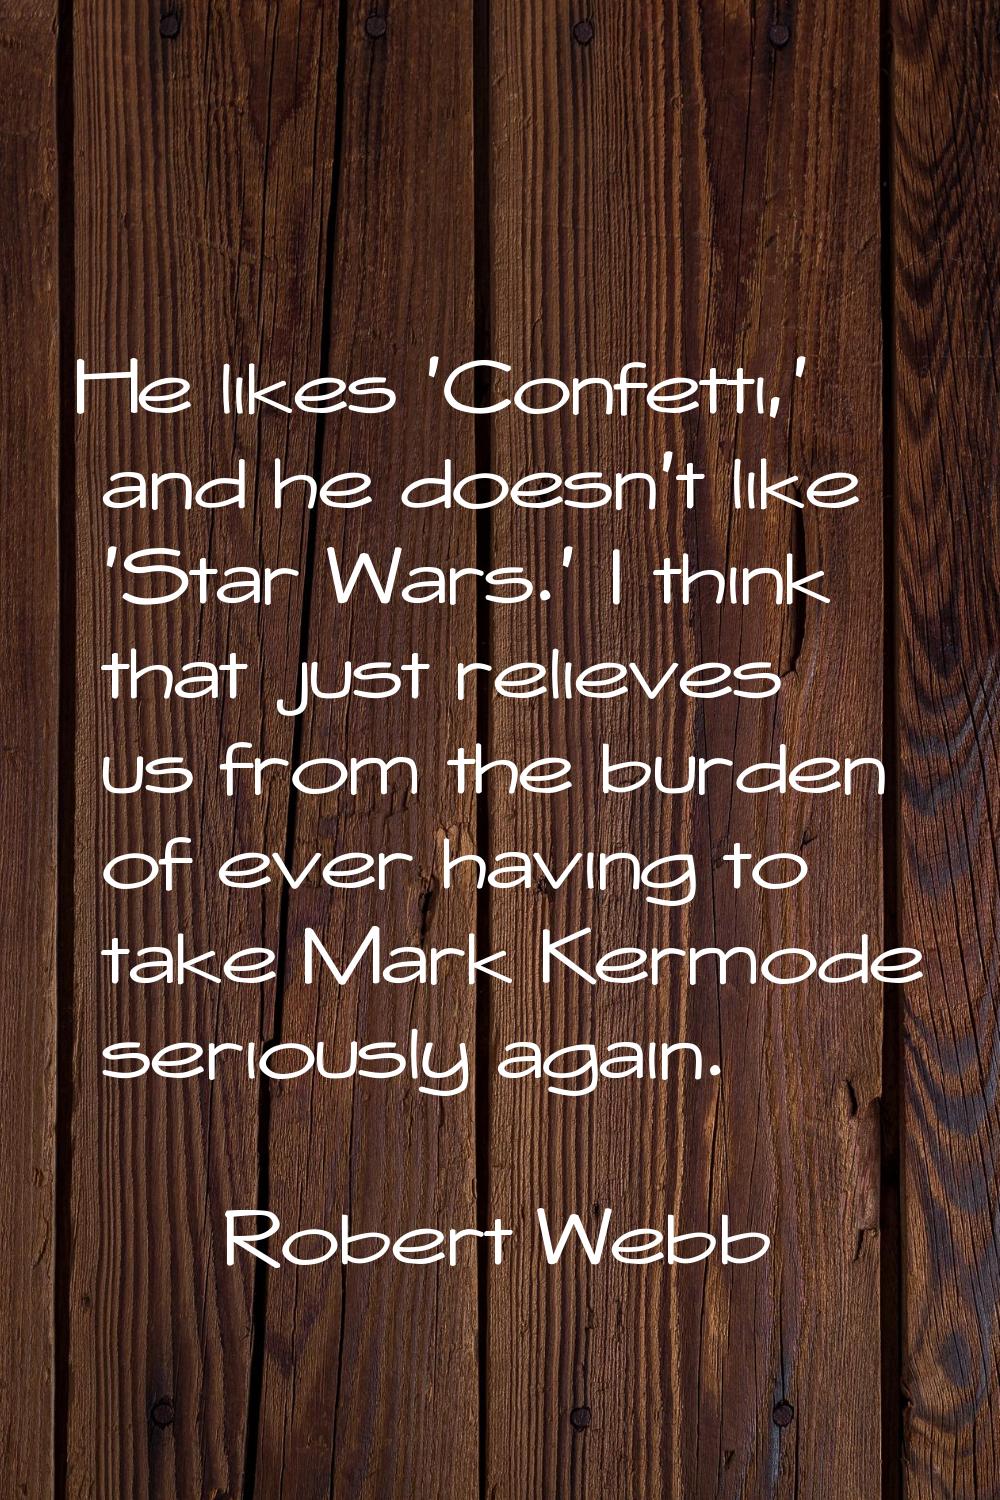 He likes 'Confetti,' and he doesn't like 'Star Wars.' I think that just relieves us from the burden